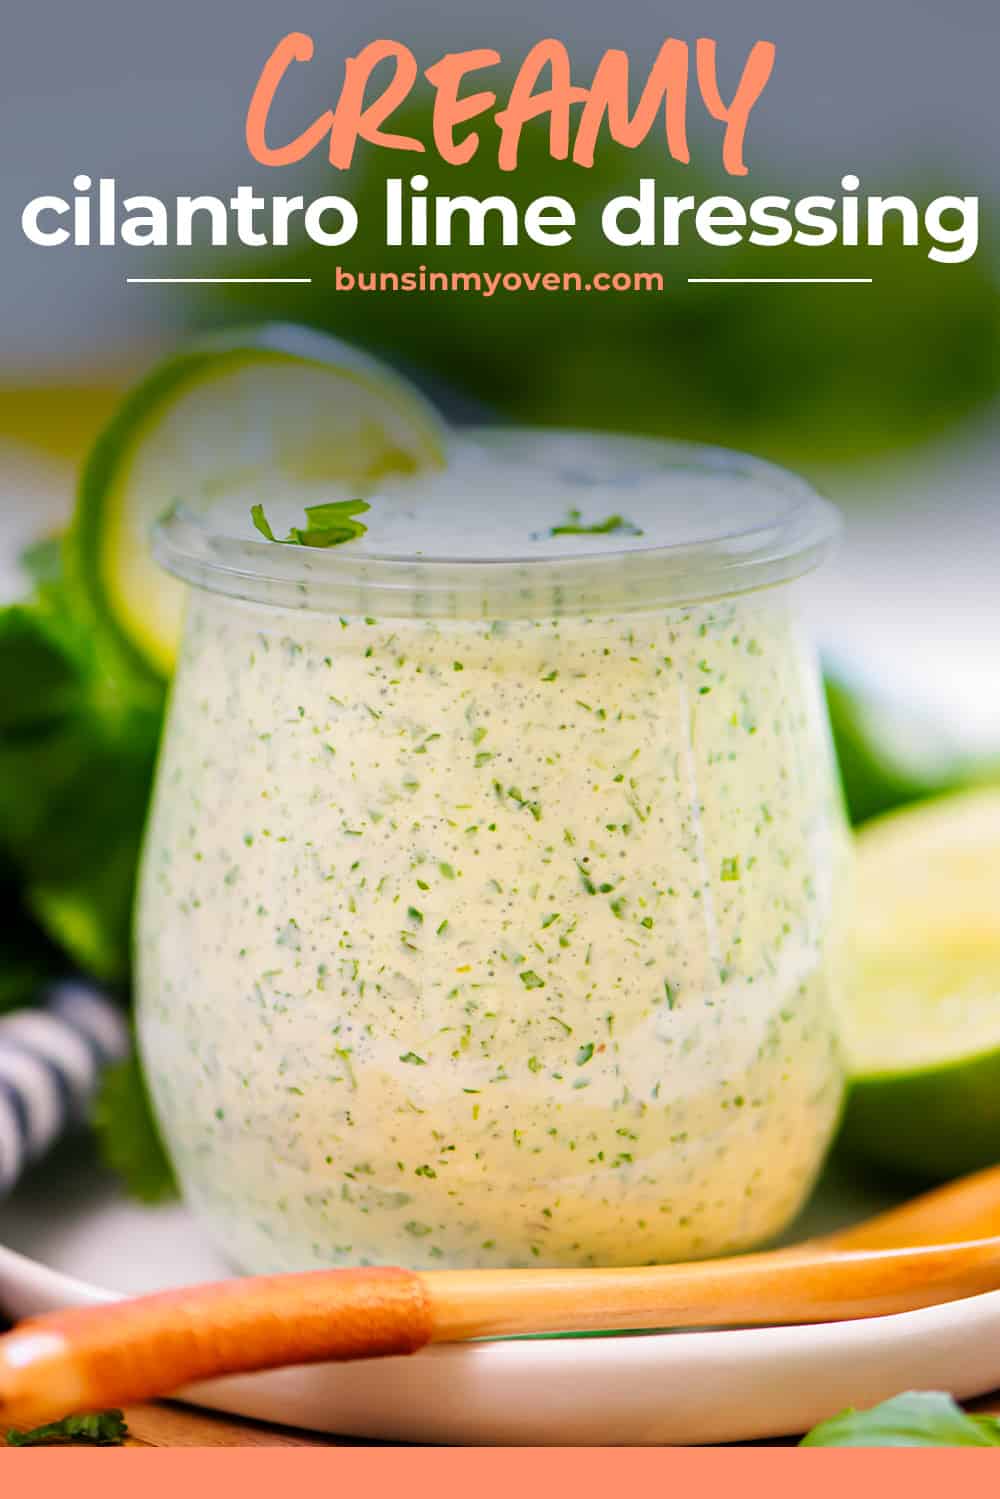 Jar full of creamy cilantro lime dressing with text for Pinterest.